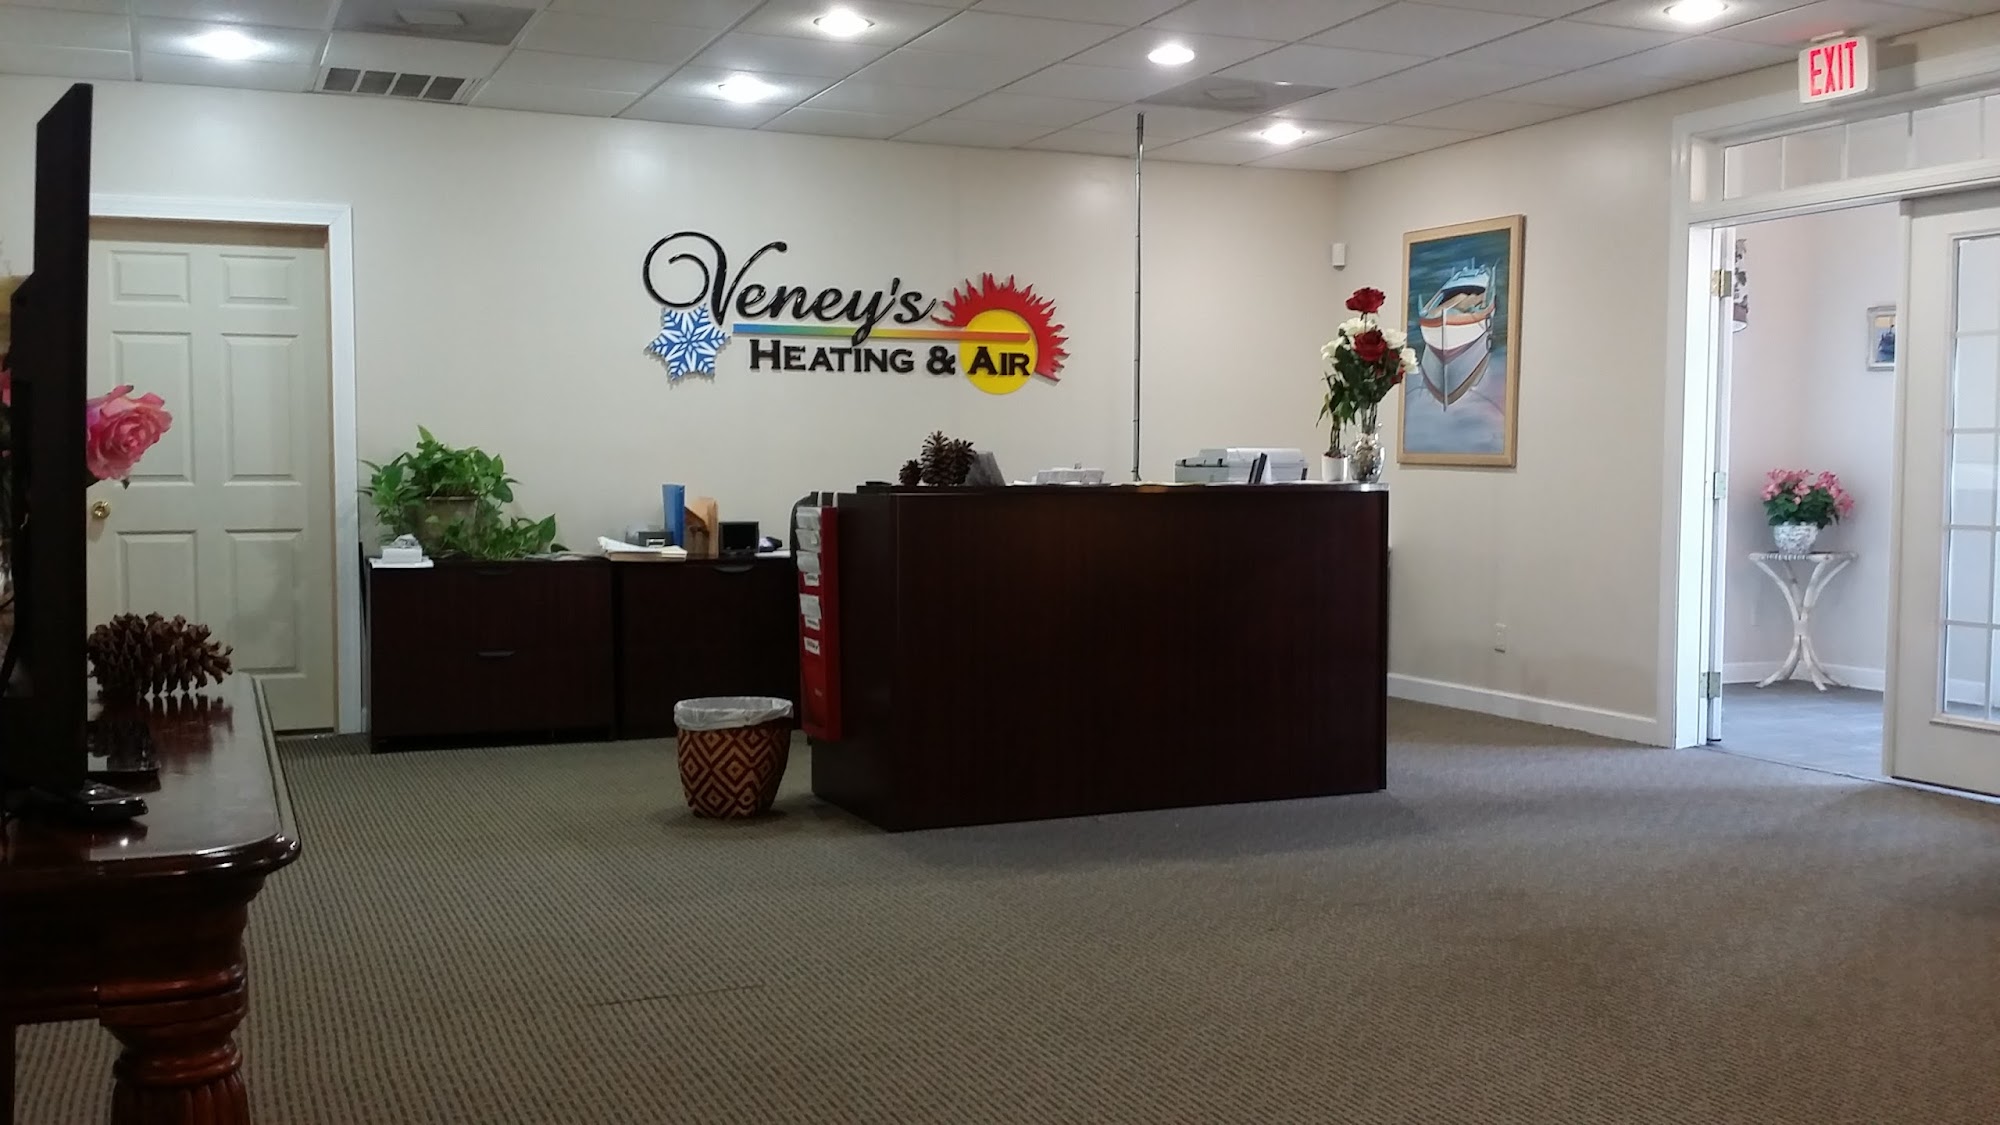 Veney's Heating & Air Conditioning